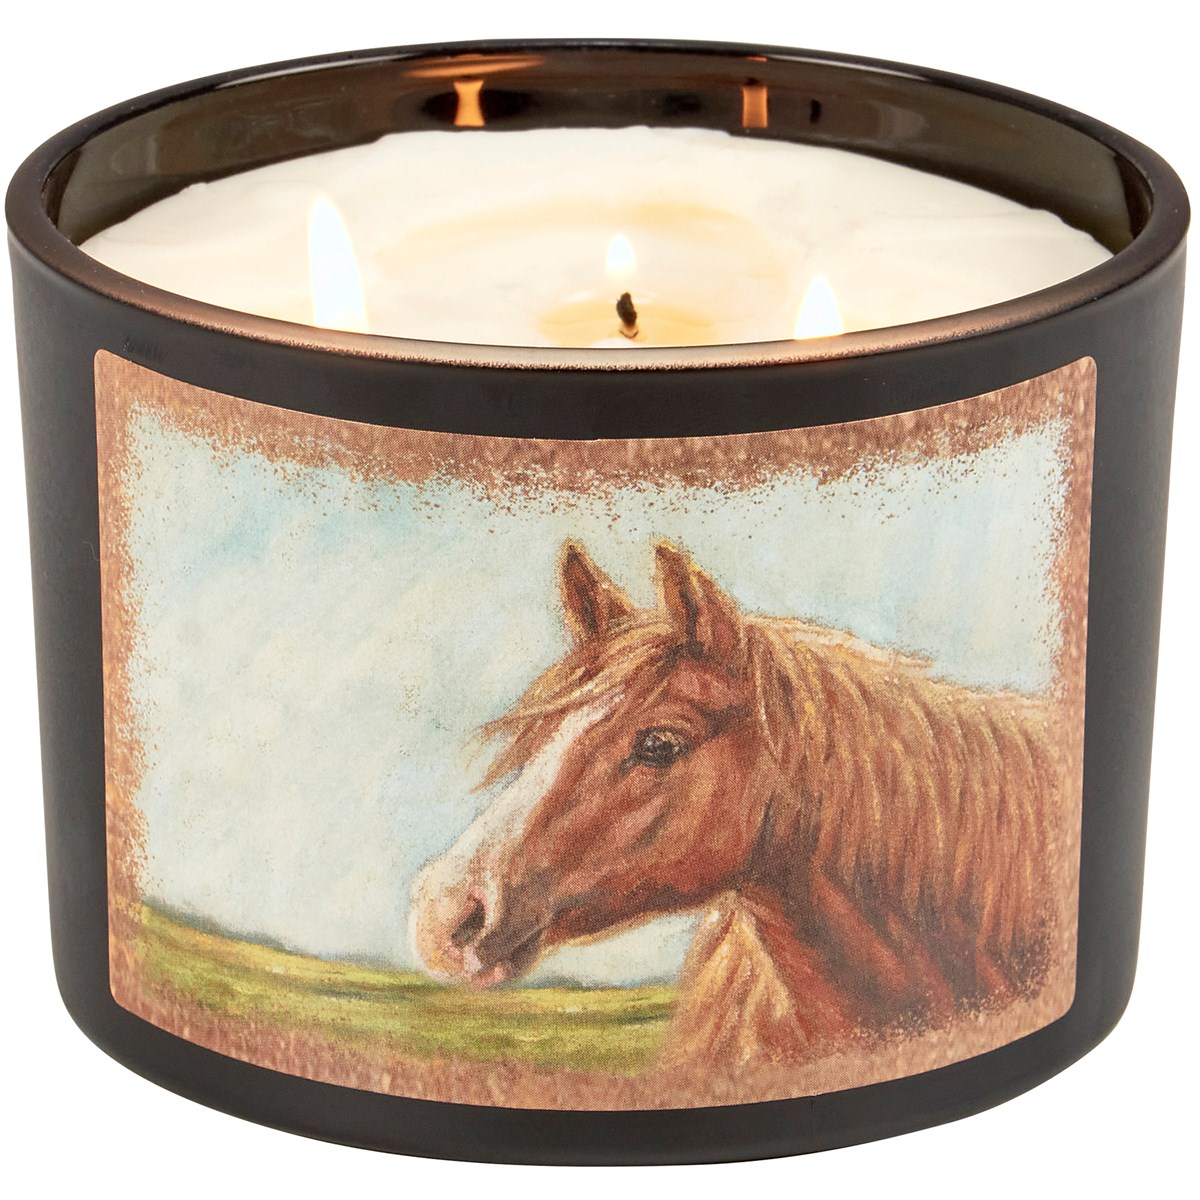 Horse Candle - Soy Wax, Glass, Cotton